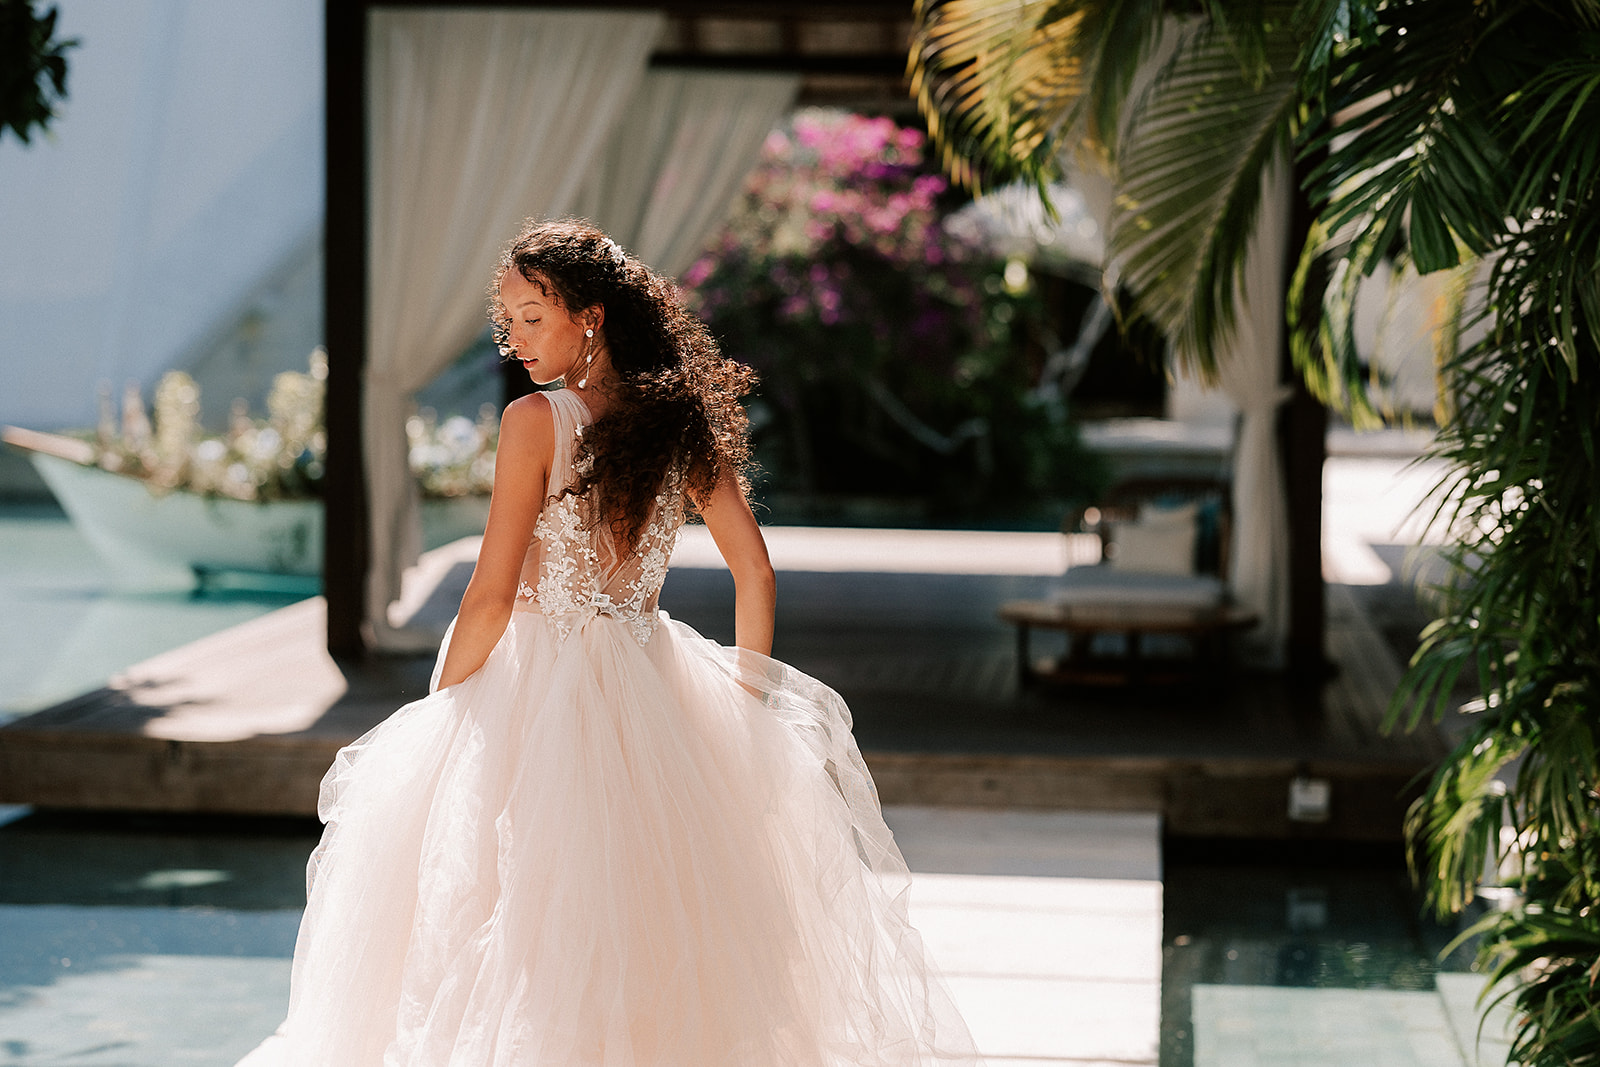 Bride is playfully walking away from the camera with the sun illuminating her gown